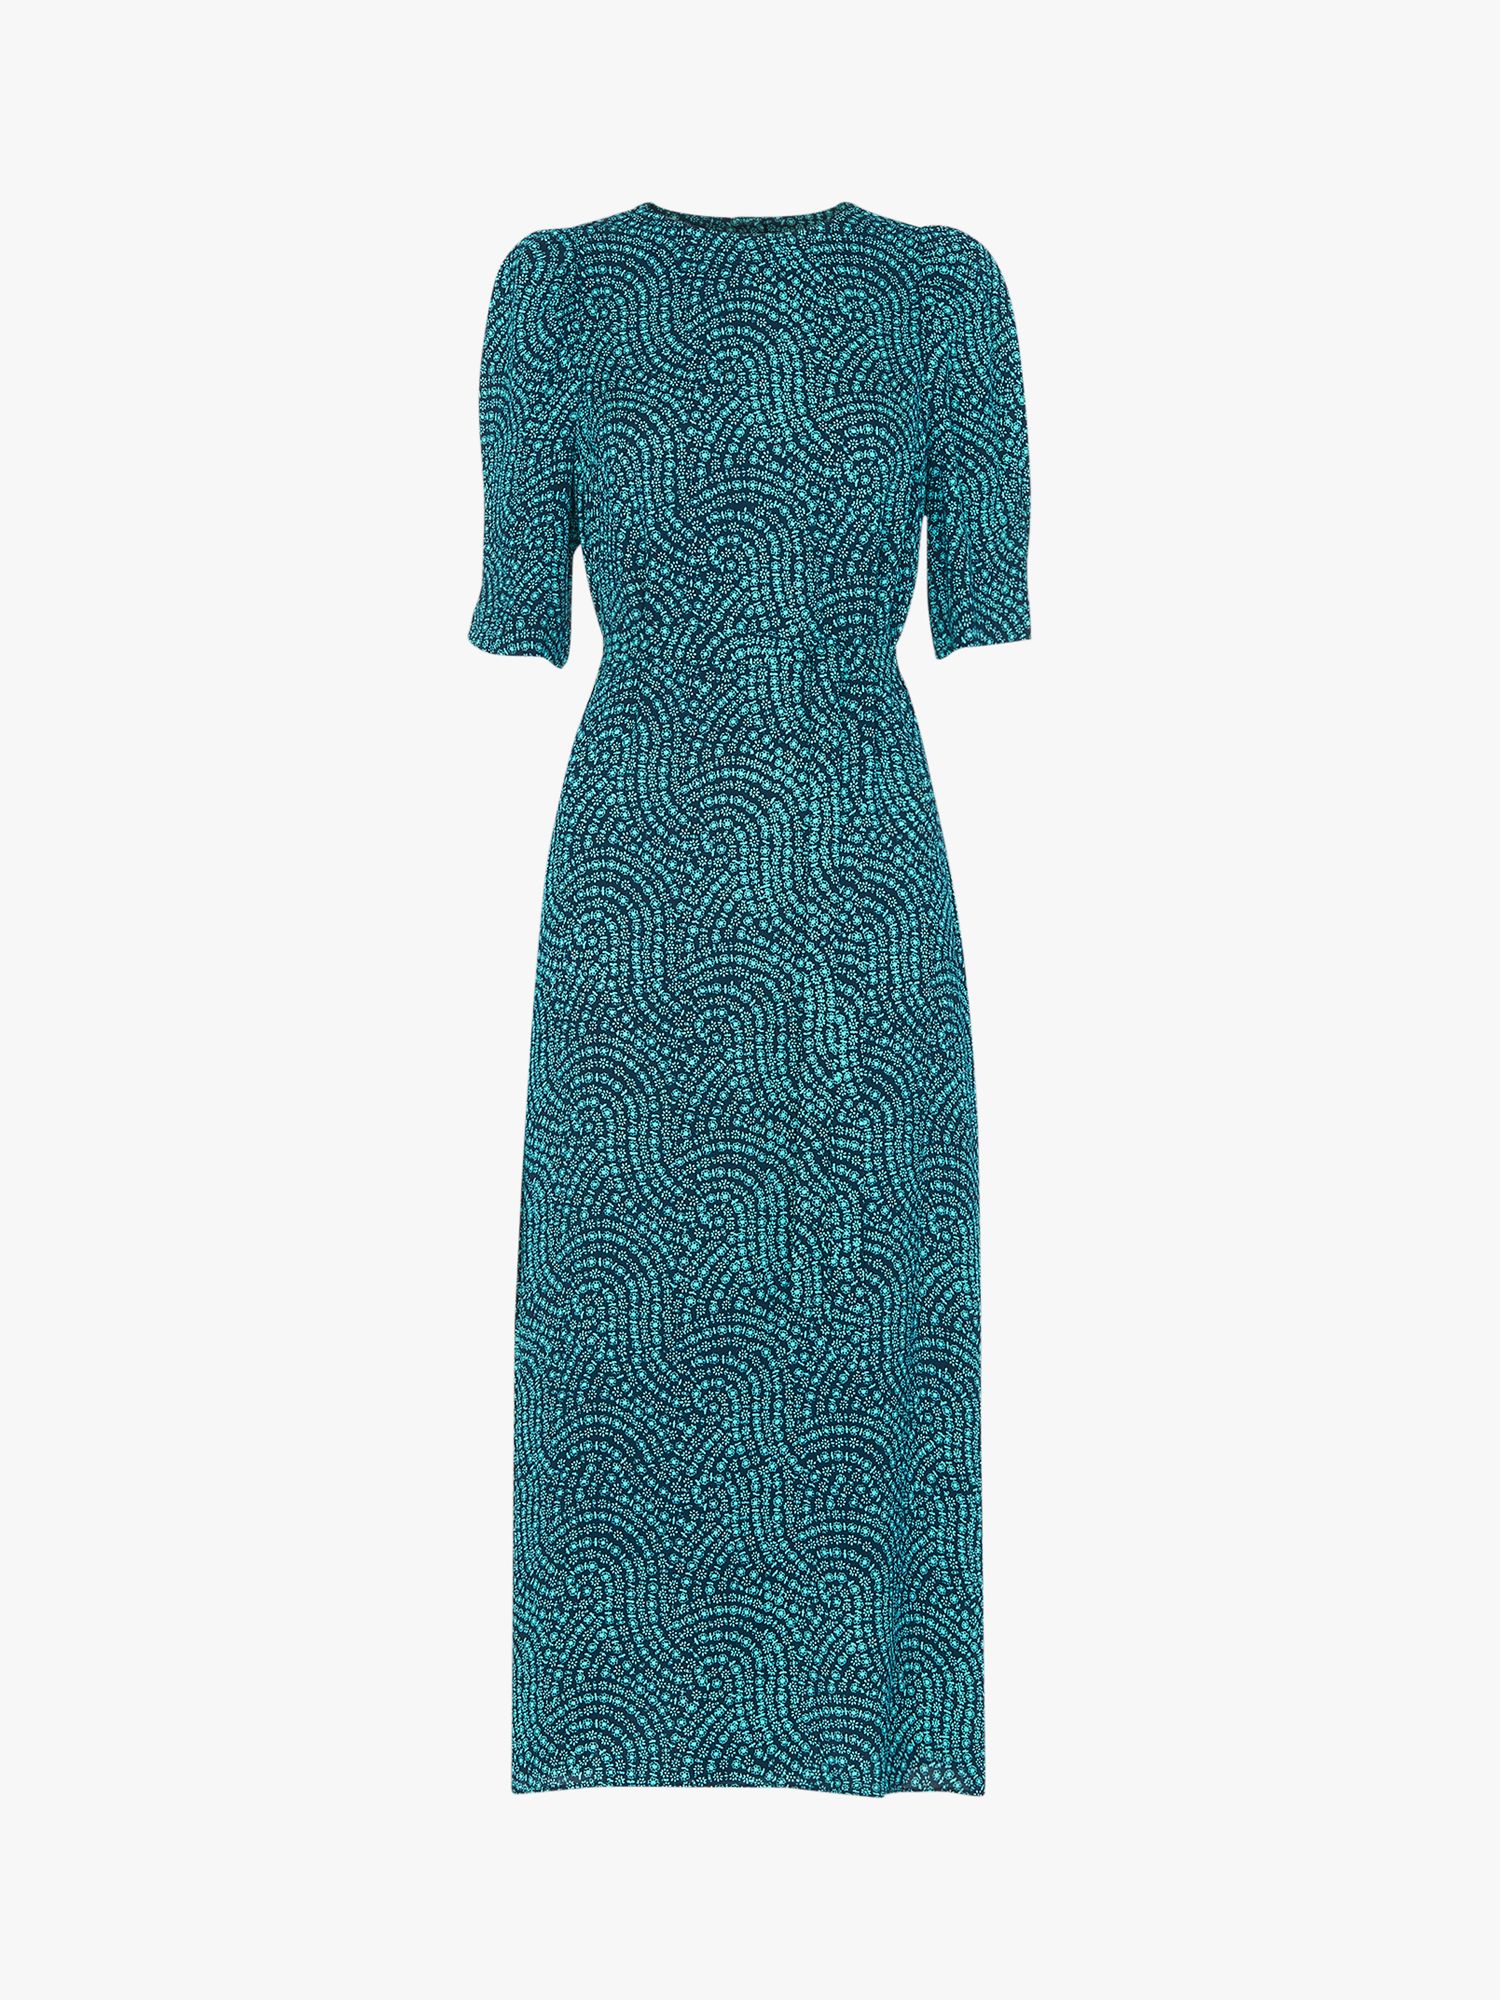 Buy Whistles Daisy Waves Cut Out Back Midi Dress, Blue/Multi Online at johnlewis.com